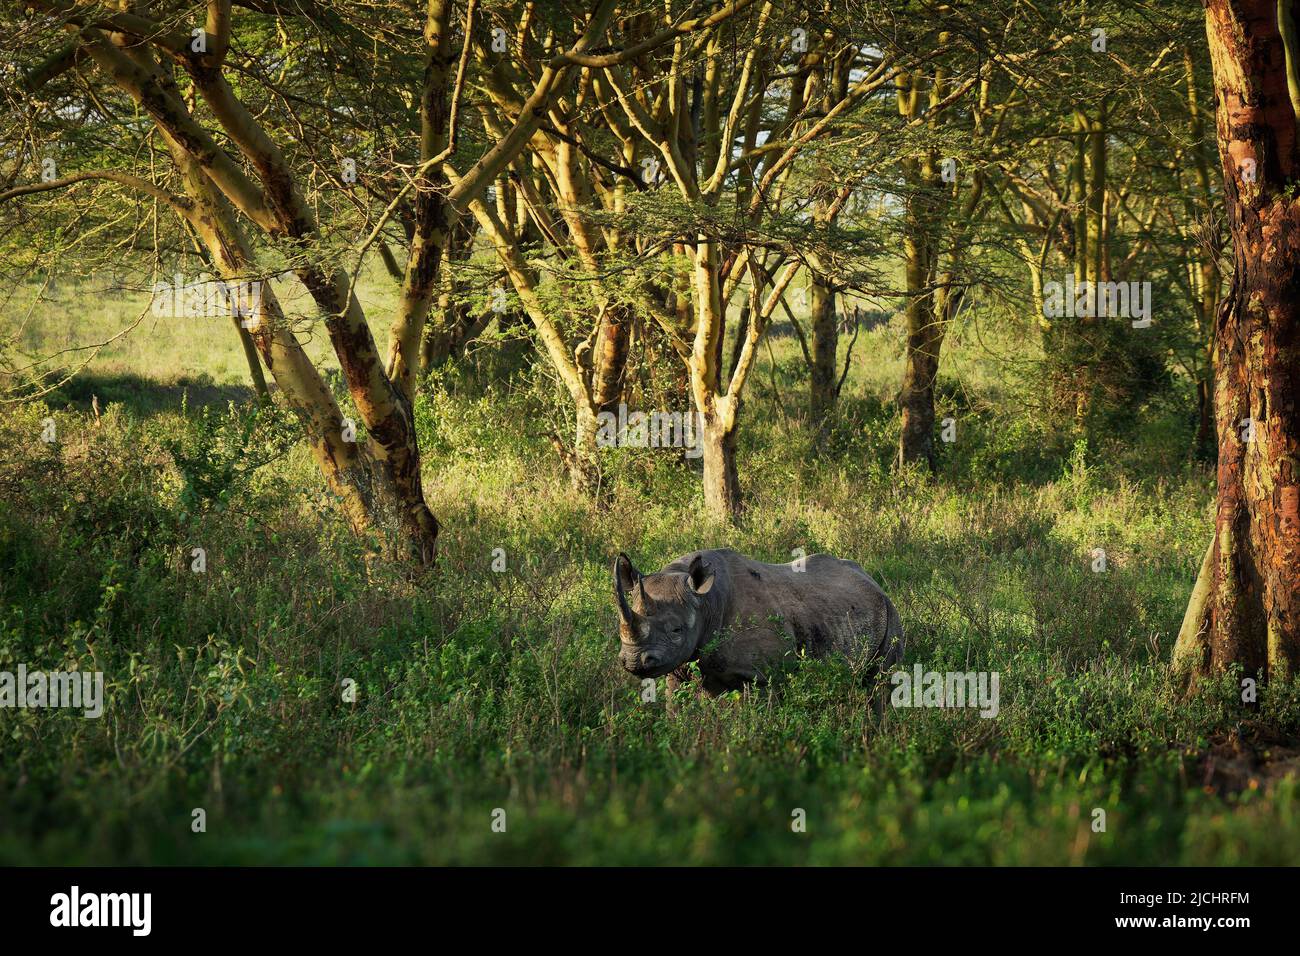 Black Rhinoceros or Hook-lipped Rhinoceros - Diceros bicornis with environment, native to eastern and southern Africa, crossing the road and standing Stock Photo